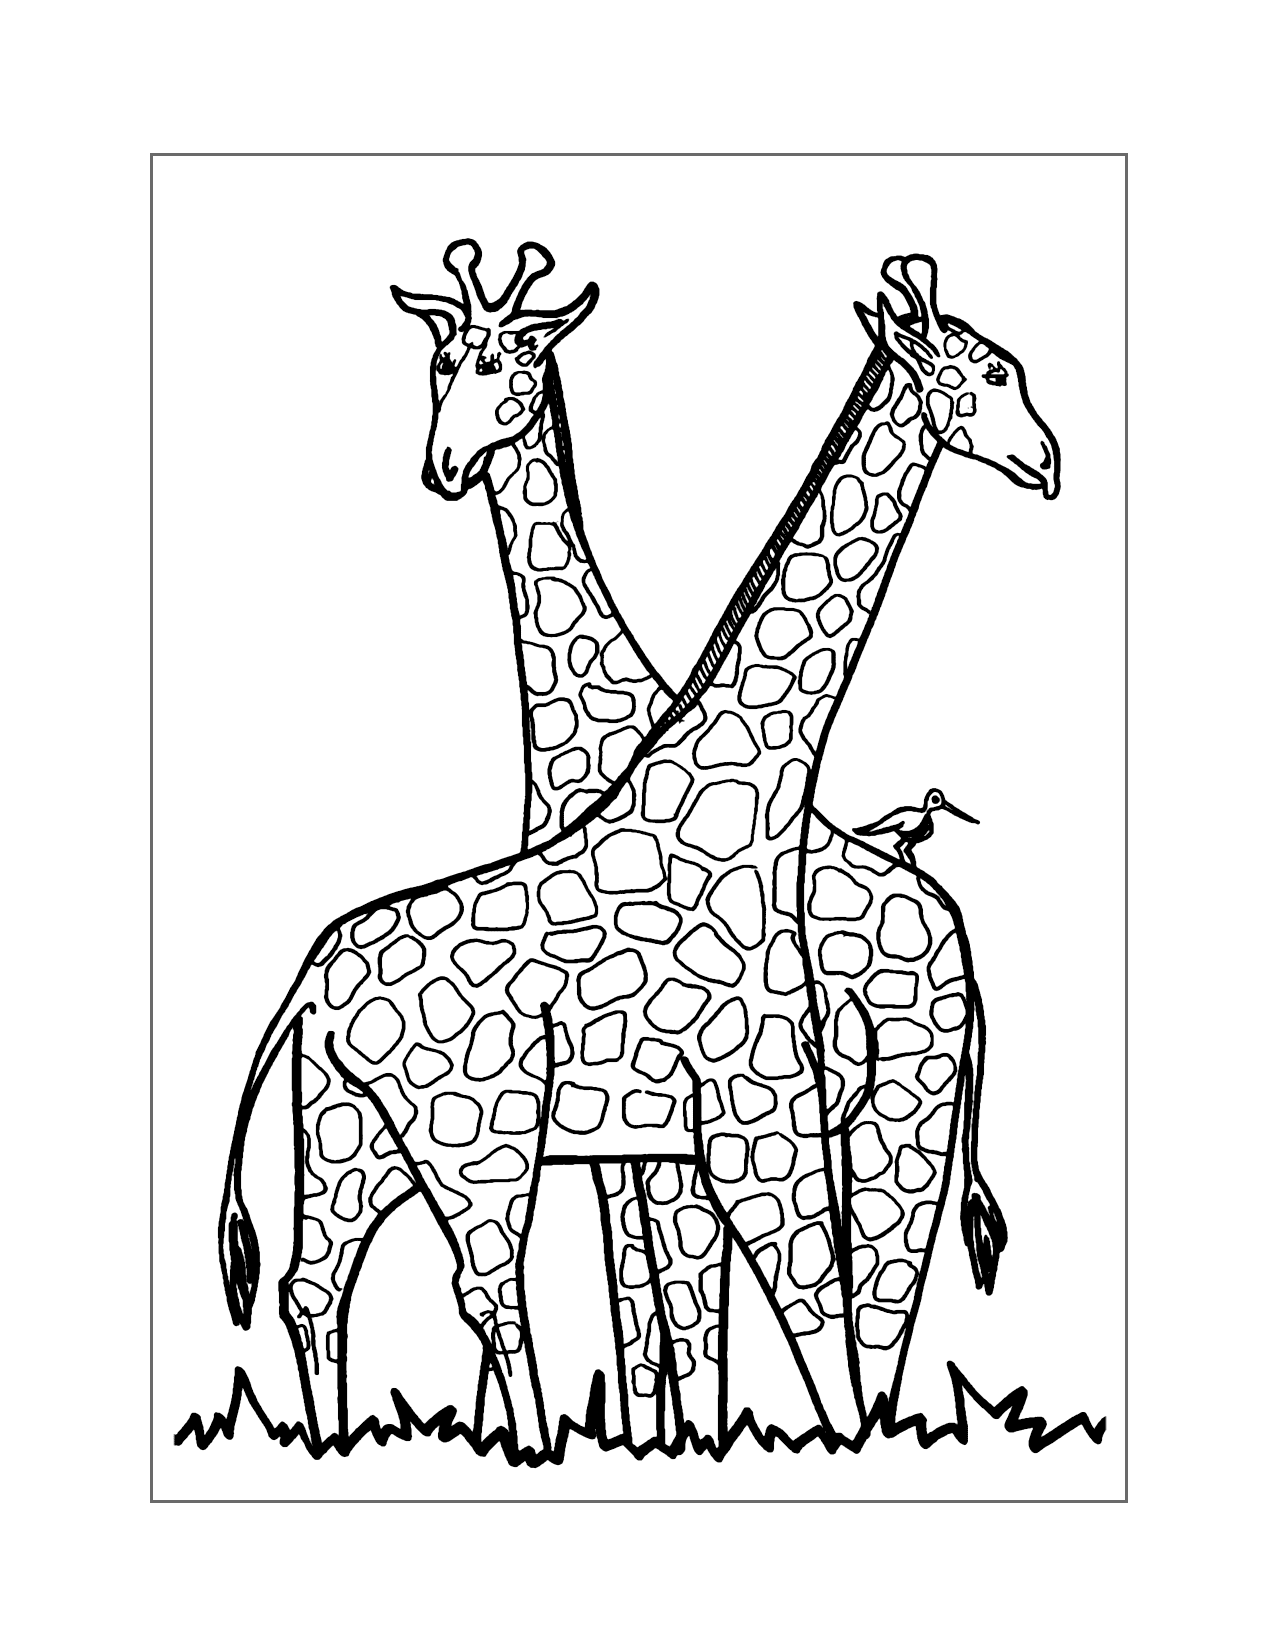 Two Giraffe Coloring Page